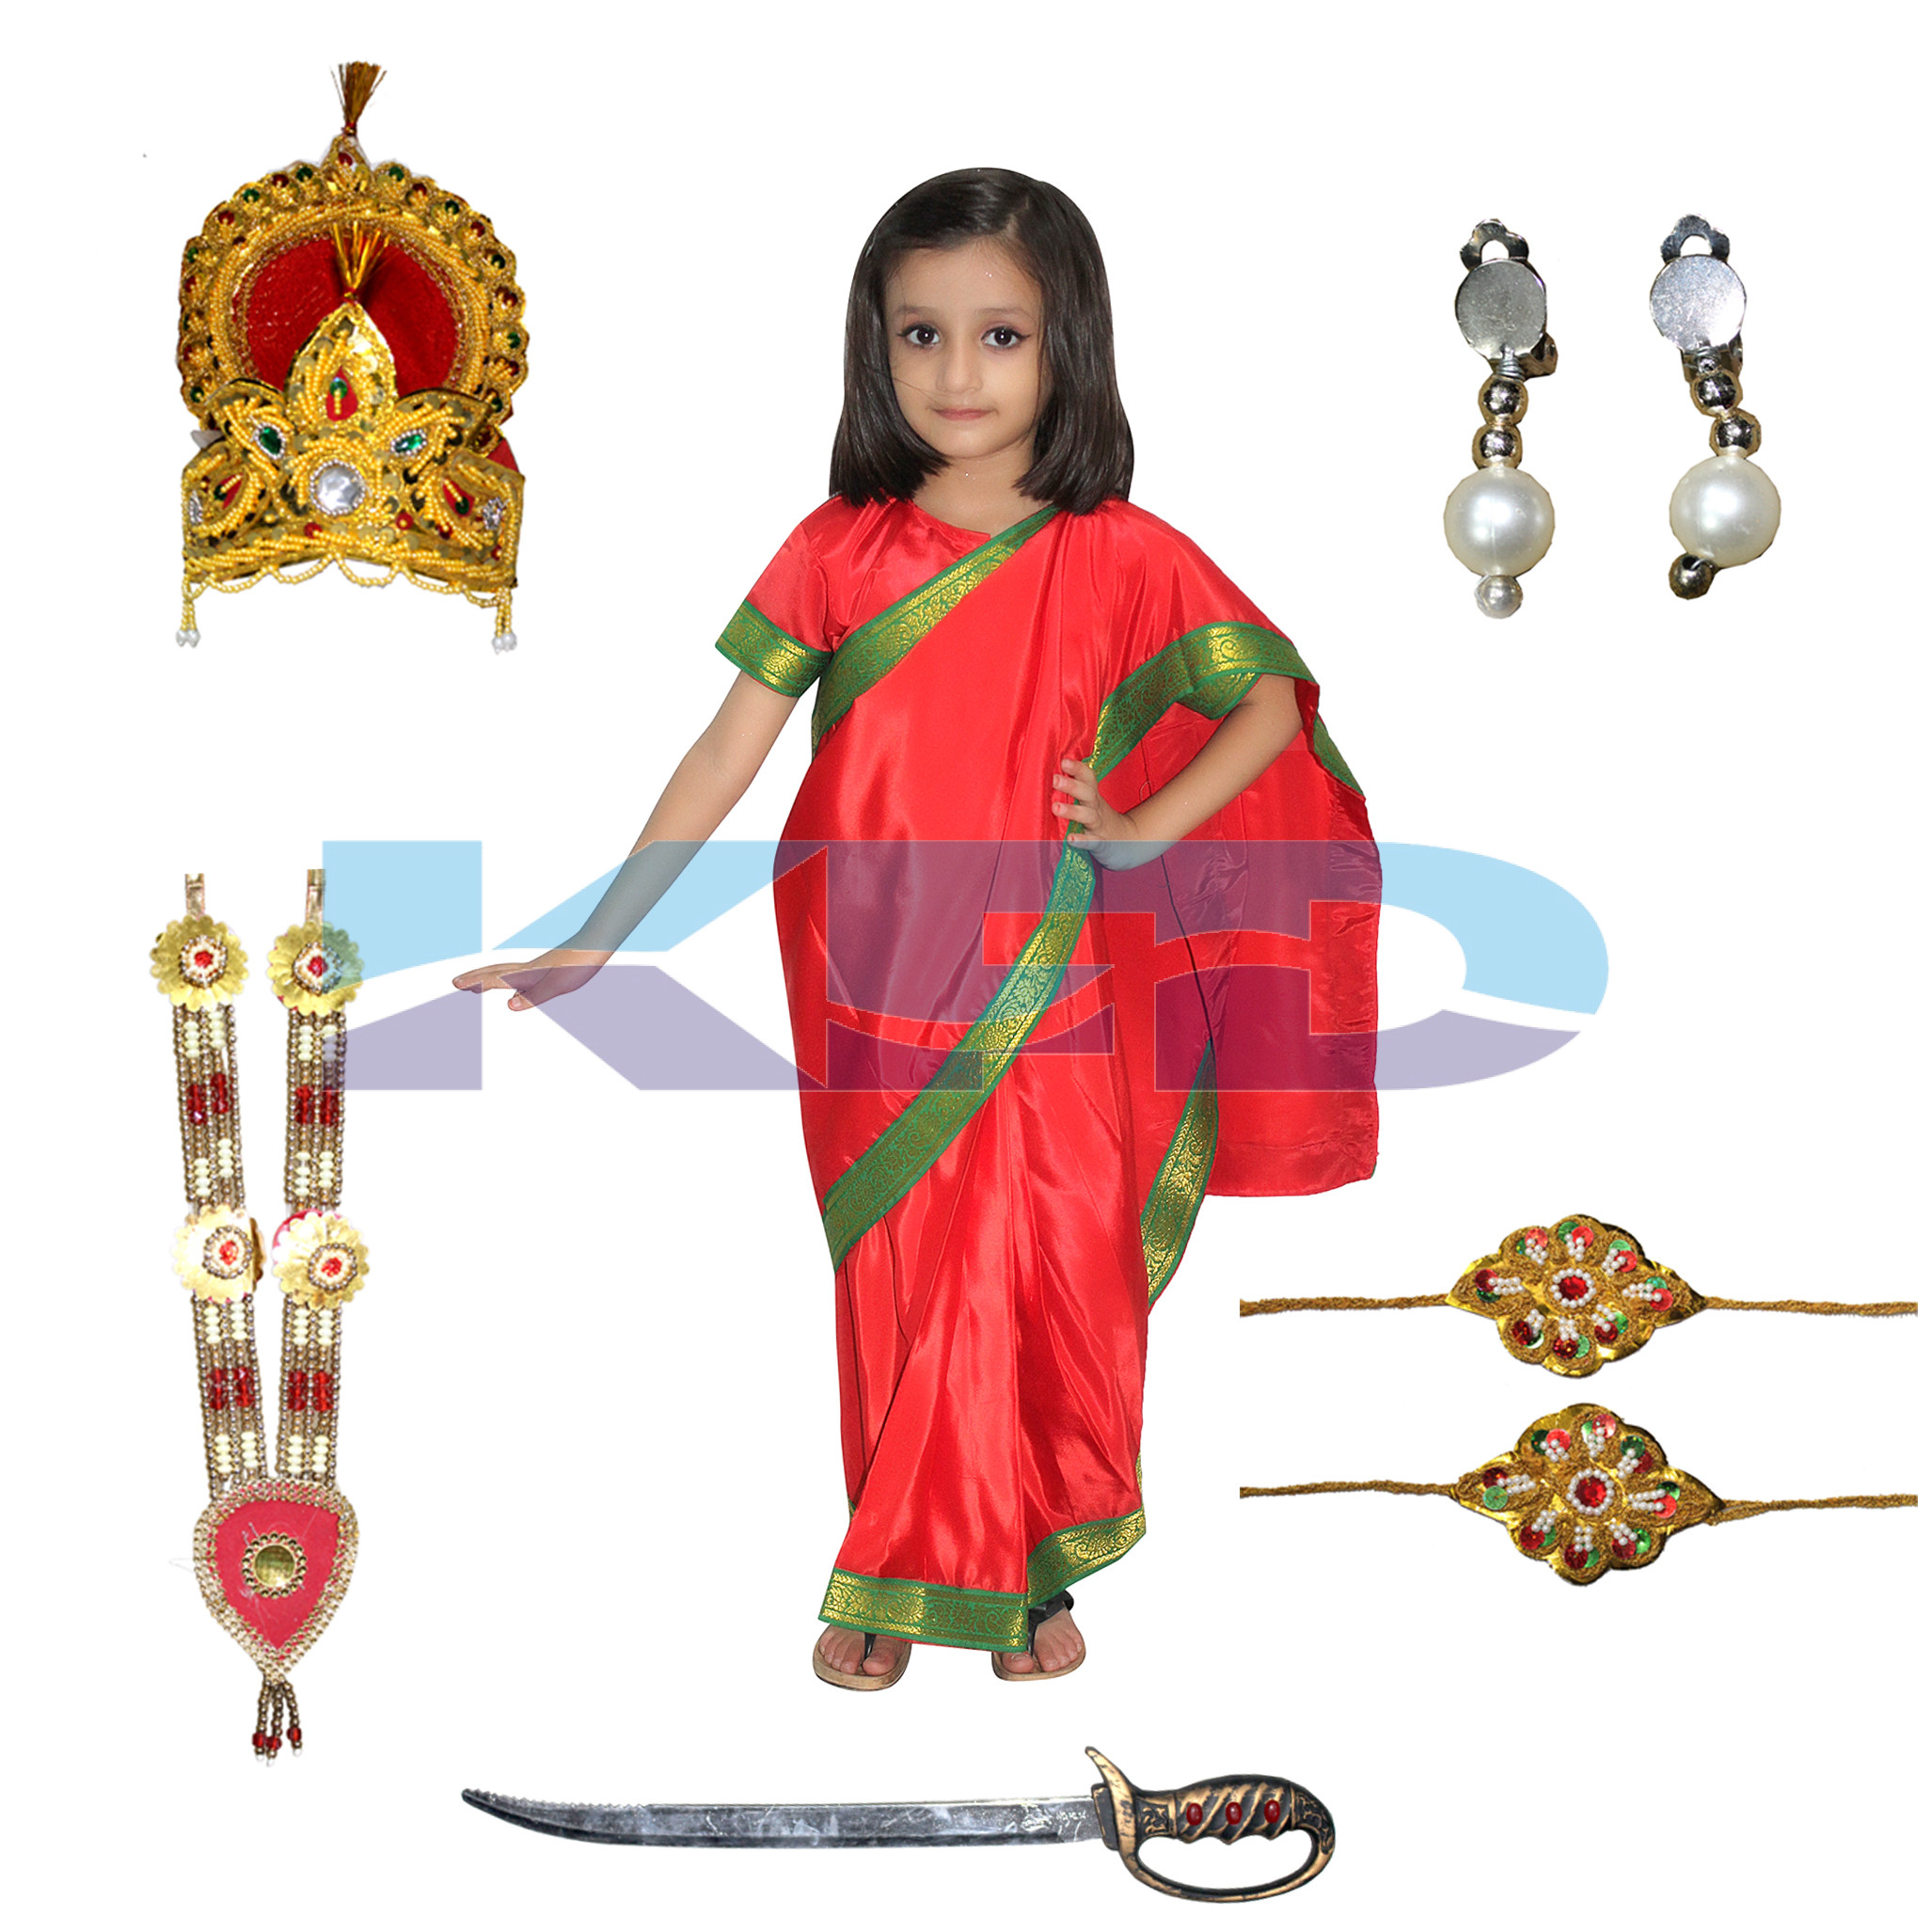  Red saree durga fancy dress for kids,National Hero Costume for School Annual function/Theme Party/Competition/Stage Shows Dress